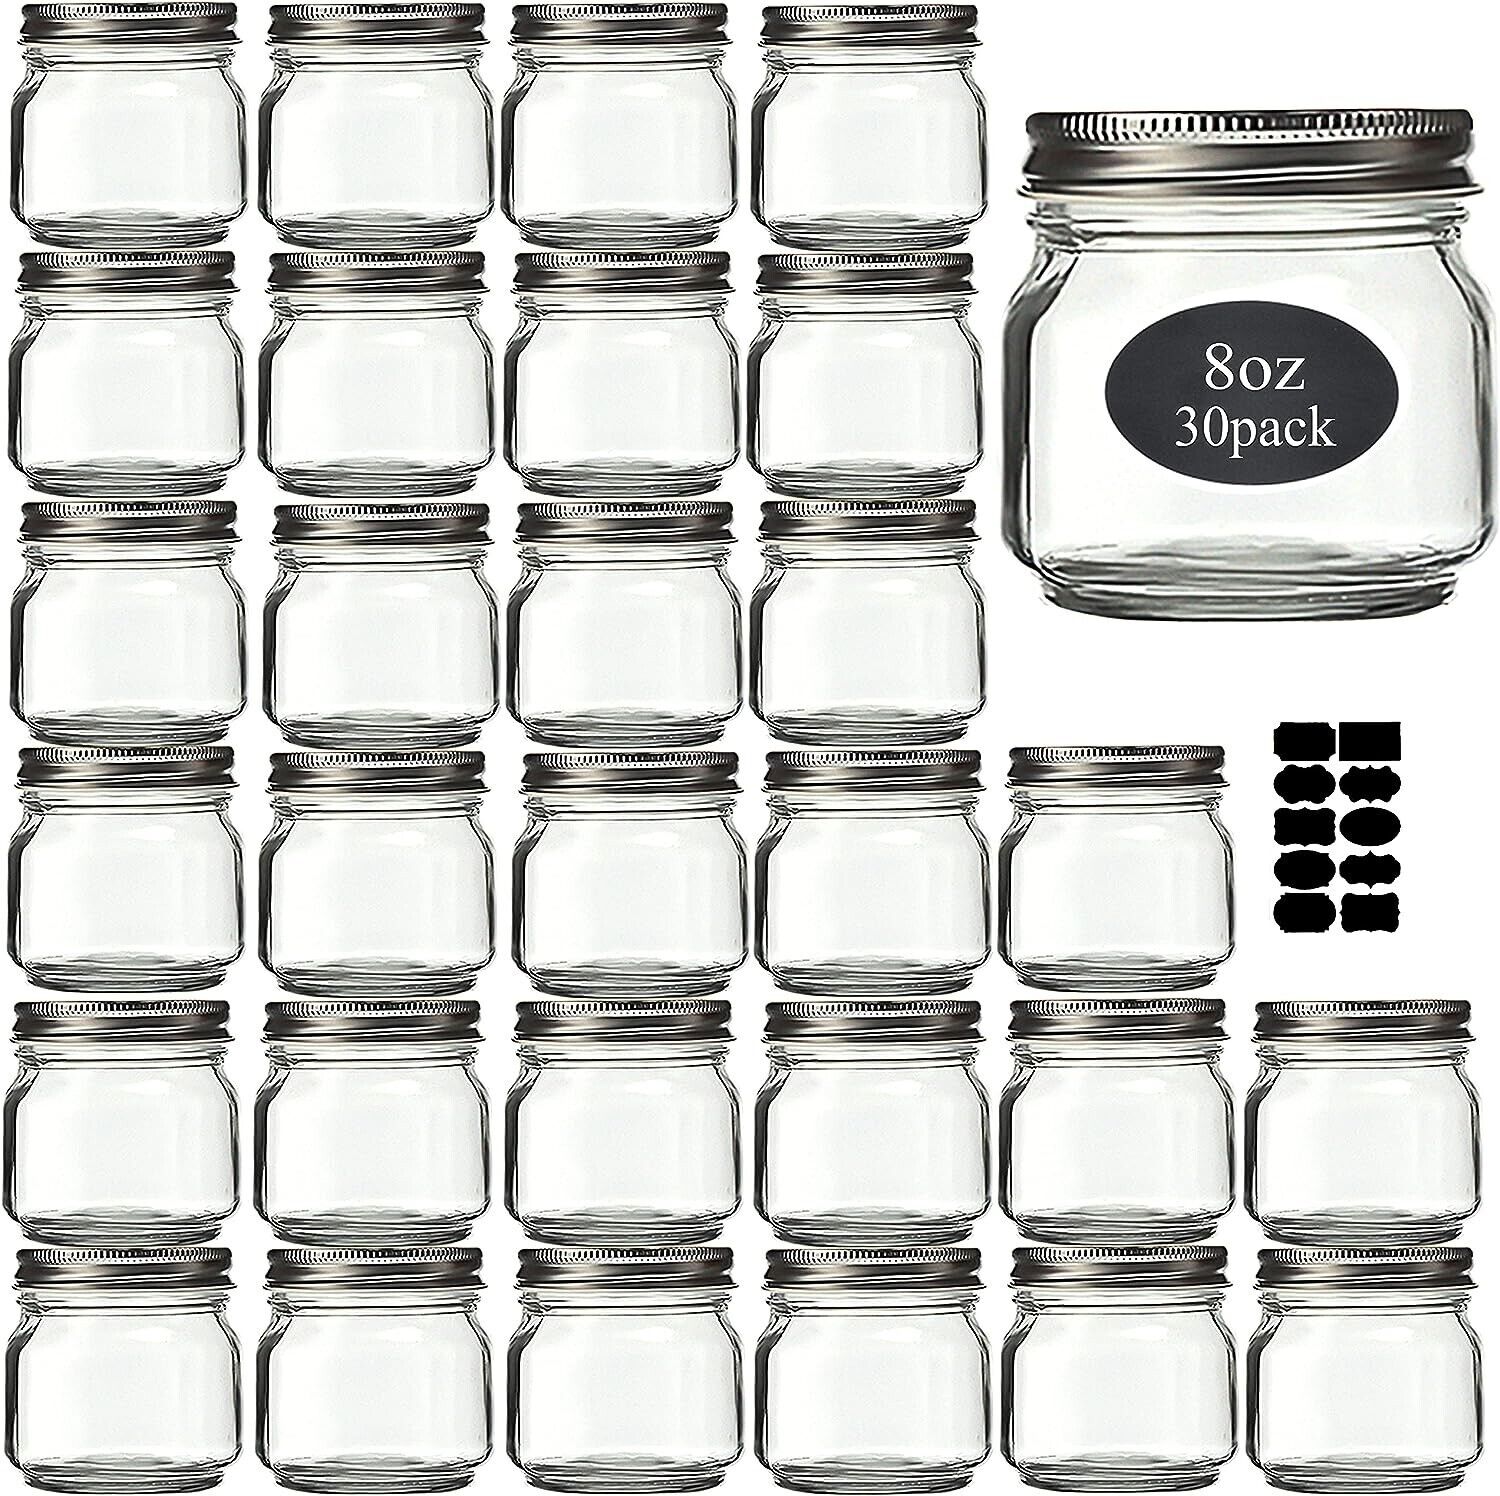 Glass Mason Jars 8 oz - 30 Pack with Silver Lids for Canning - L8.1